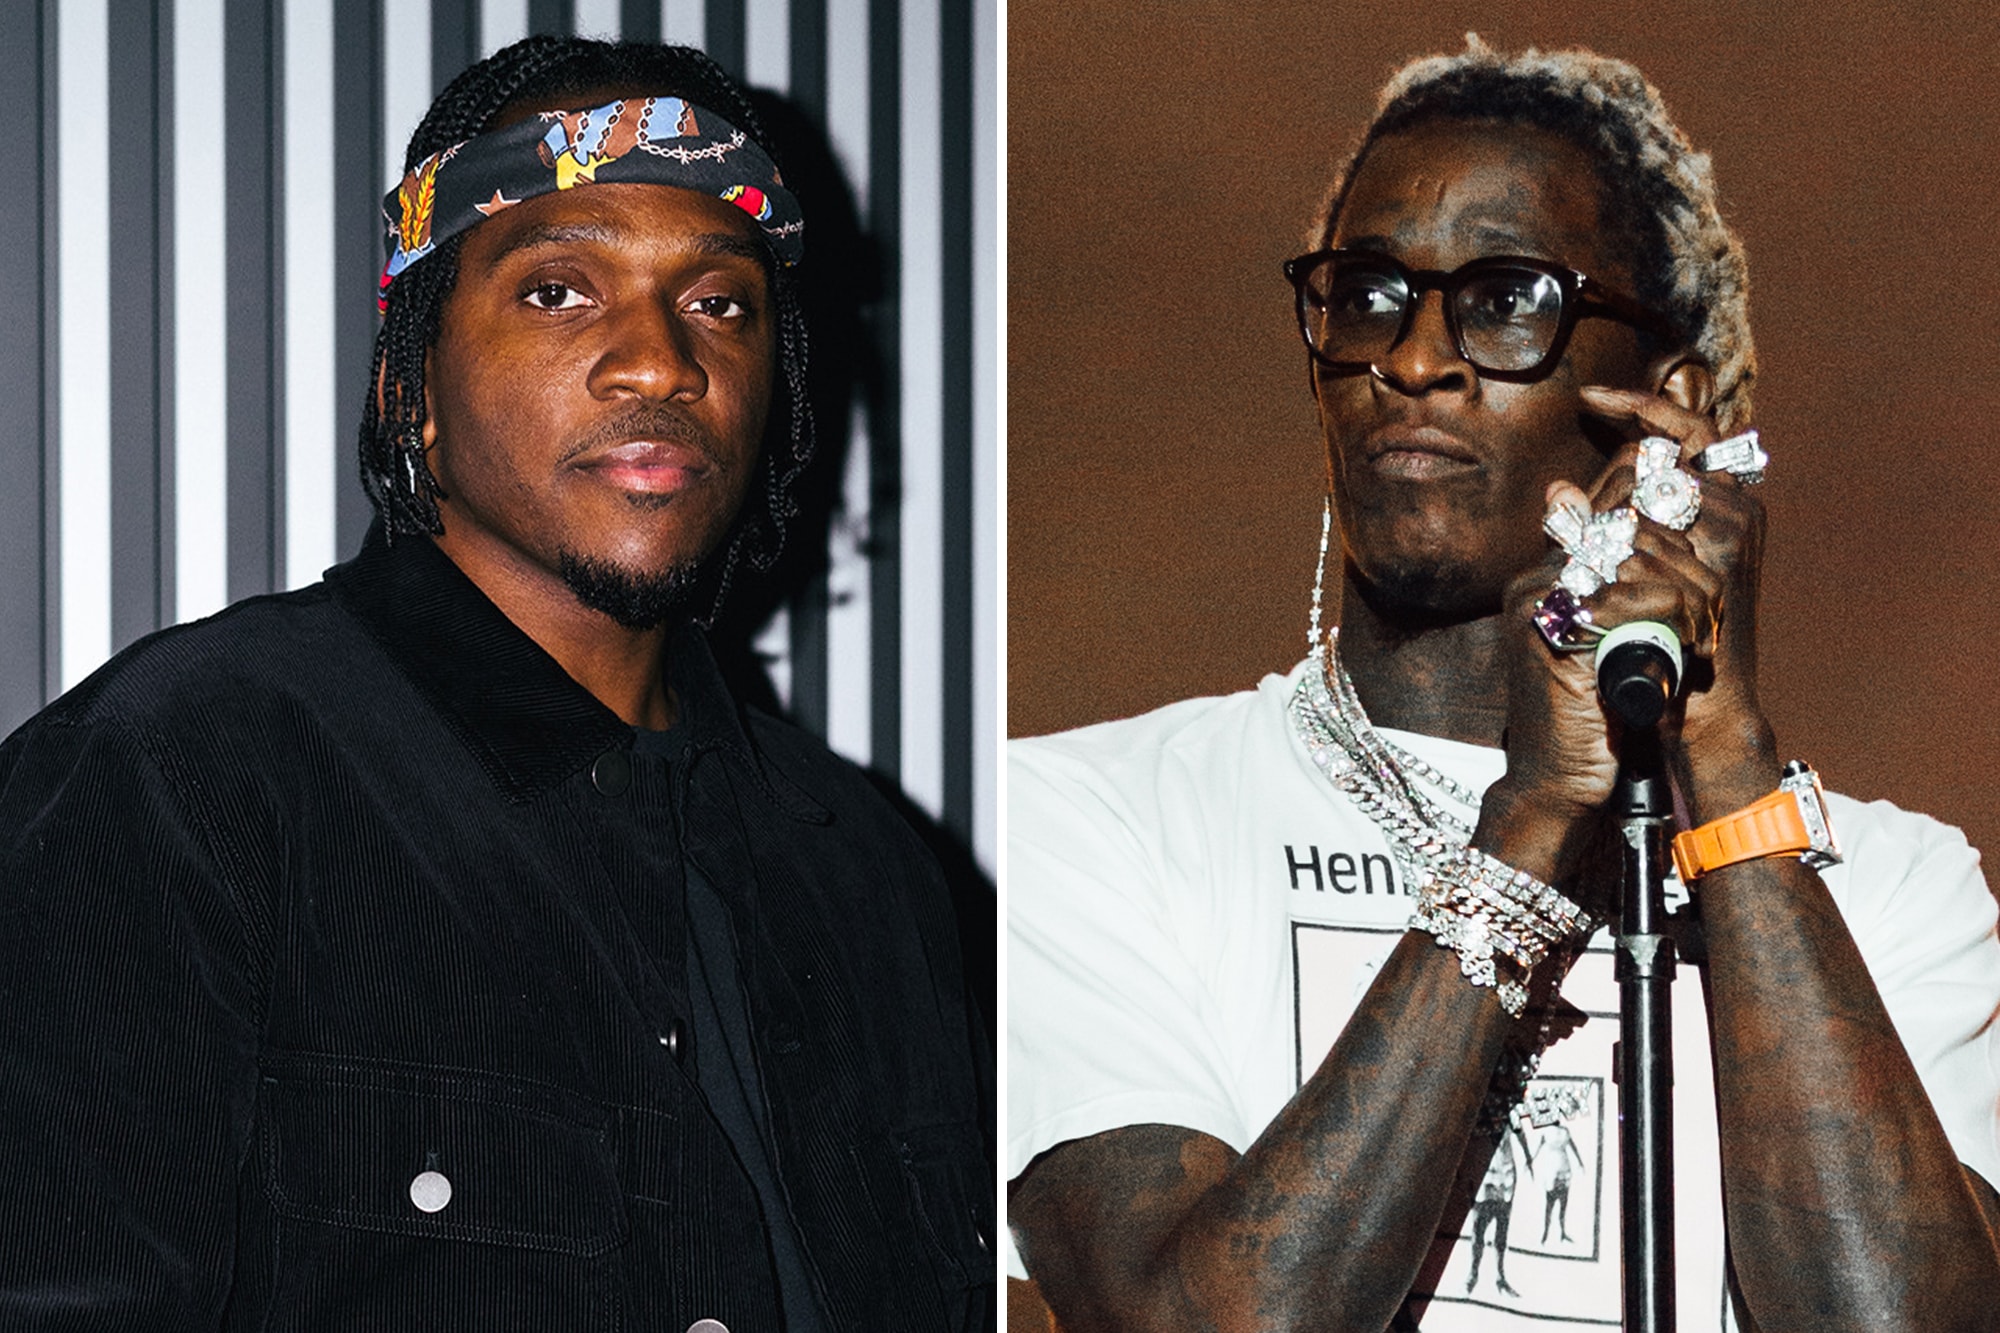 Pusha T Young Thug Gunna Pop Smoke Drake Diss Shoot for the Stars Aim for the Moon Collaboration Surfaces Info Paranoia Steven Victor HYPEBEAST Hip Hop Rap Beef Snitches Story of Adidon Rick Ross Lil Wayne Gunna